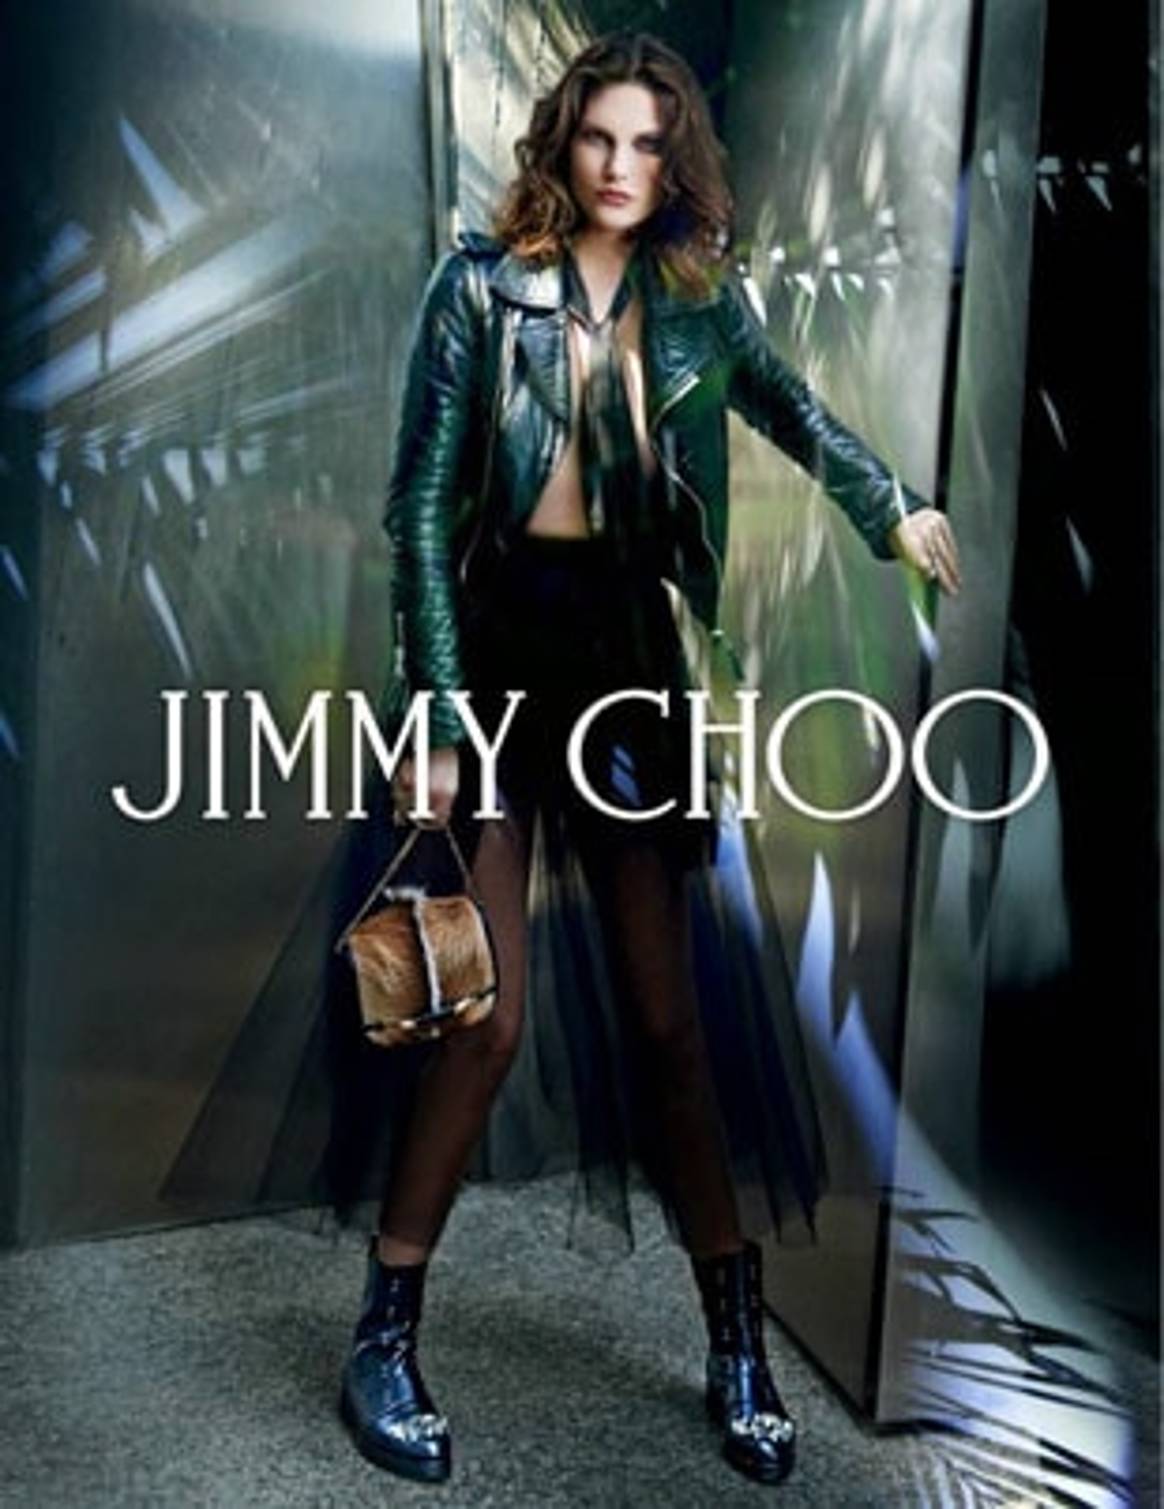 Jimmy Choo expected to float at lowest end of price range